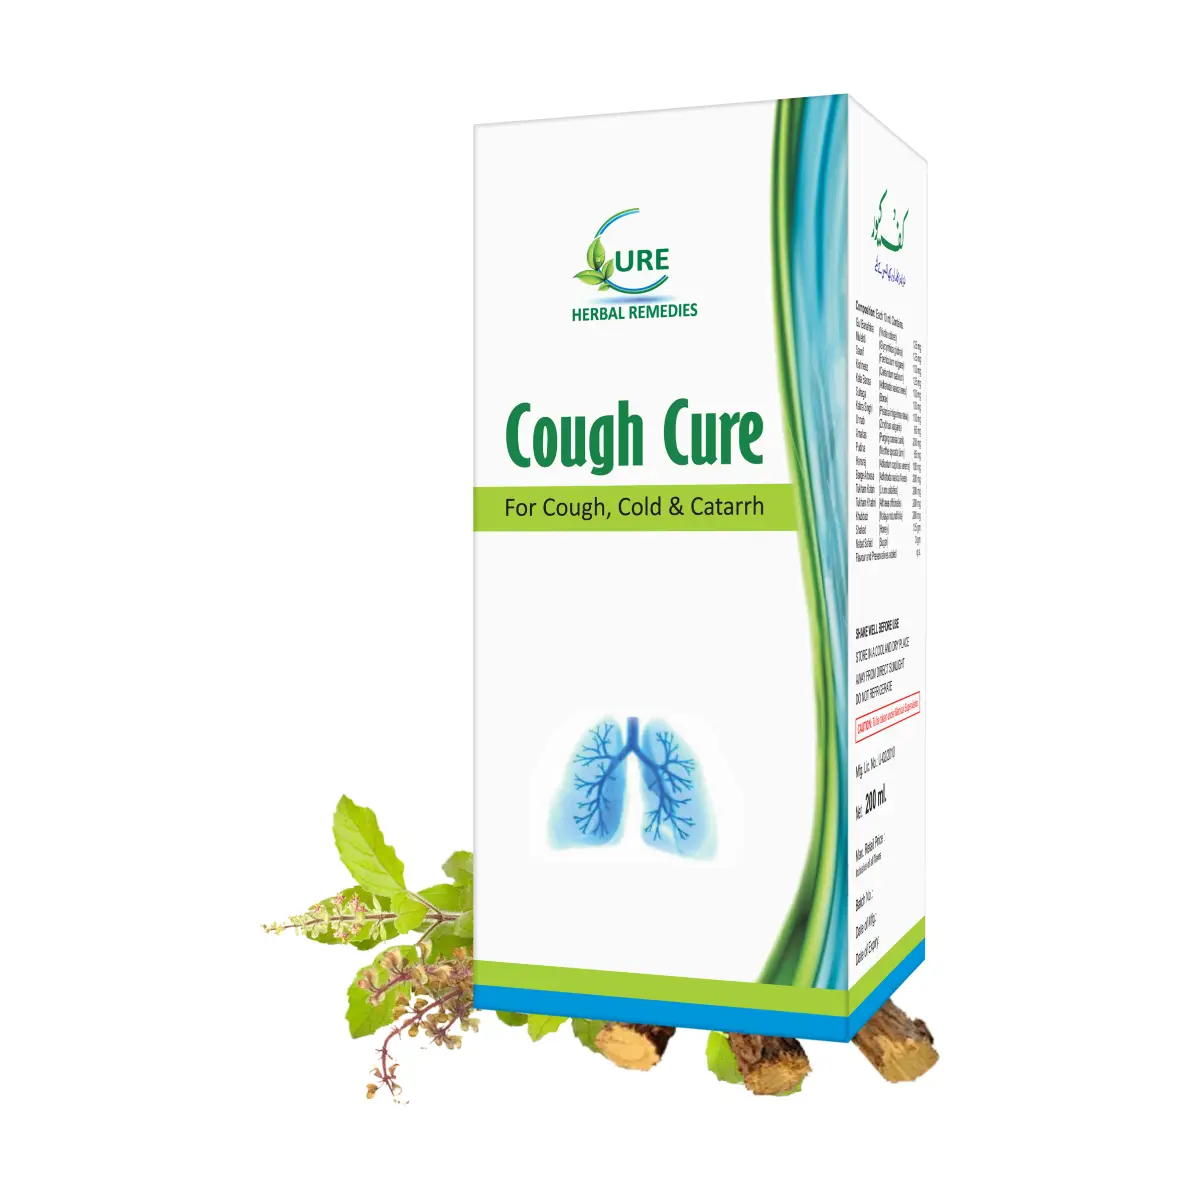 Cough syrup for dry wet cough - cough cure